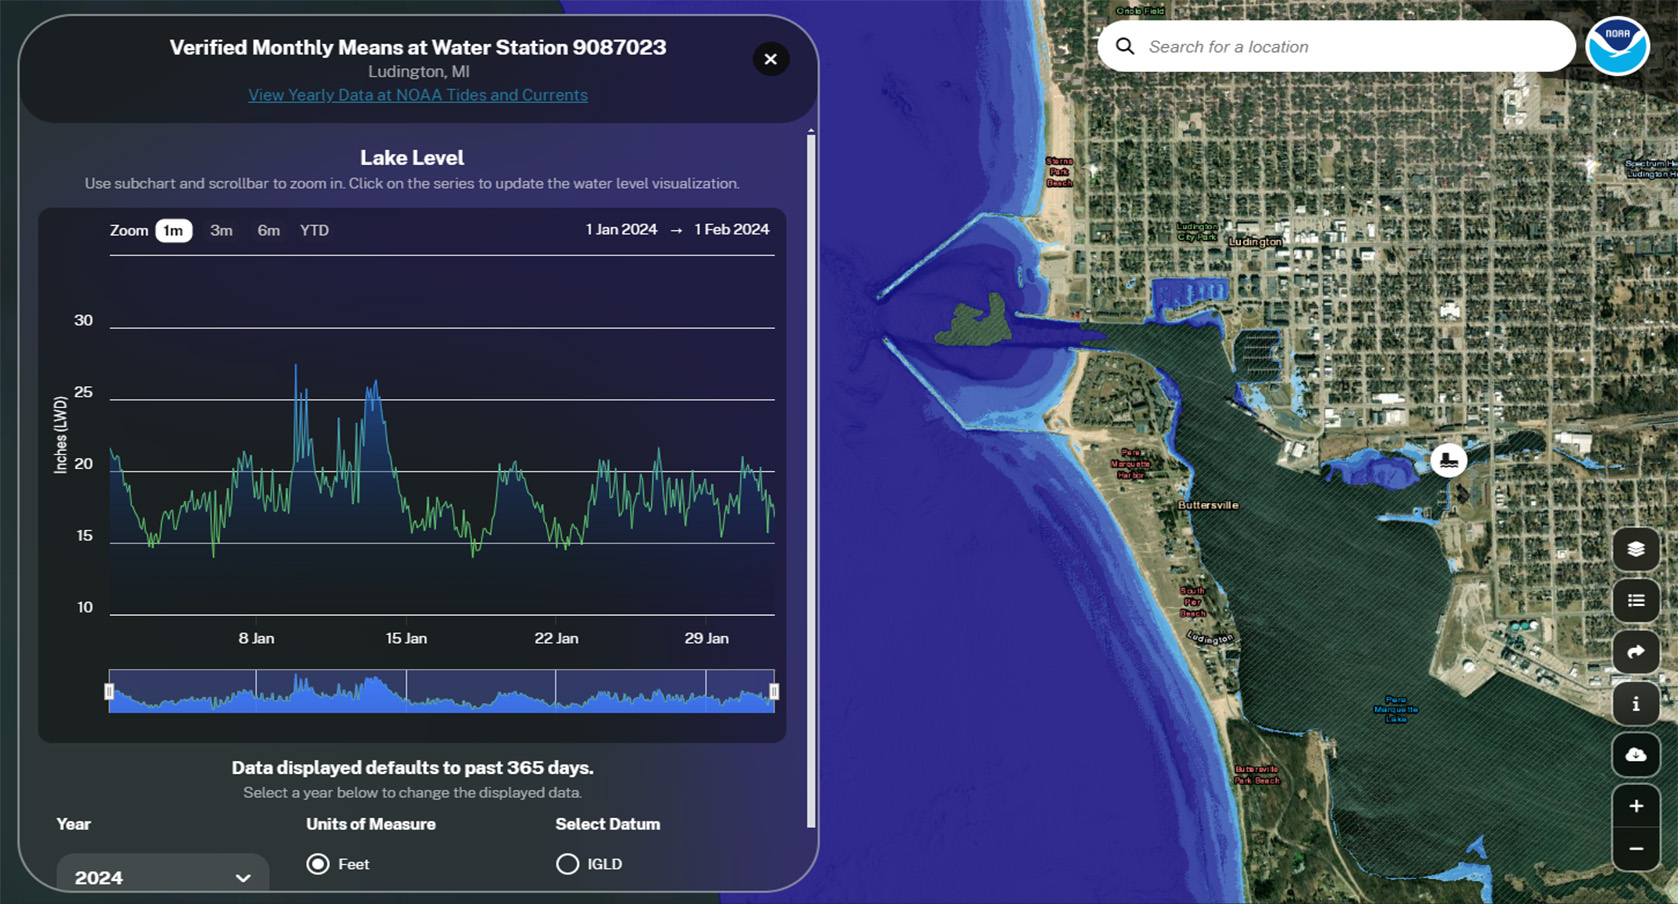 Thanks to funding from the Bipartisan Infrastructure Law, NOAA’s Lake Level Viewer was updated with a variety of enhancements that significantly improve functionality.



Updates include: 

Customized settings to visualize Great Lake-specific historical and current water levels and associated inundation;

Faster, dynamic rendering of water levels, which allows users to interact with water level data and inundation, and depths covering a range of 13 feet; and 

Improved photo simulations.

NOAA land cover data and social vulnerability data are now available within the viewer; and the site now makes it

Easier to download all elevation and inundation data.